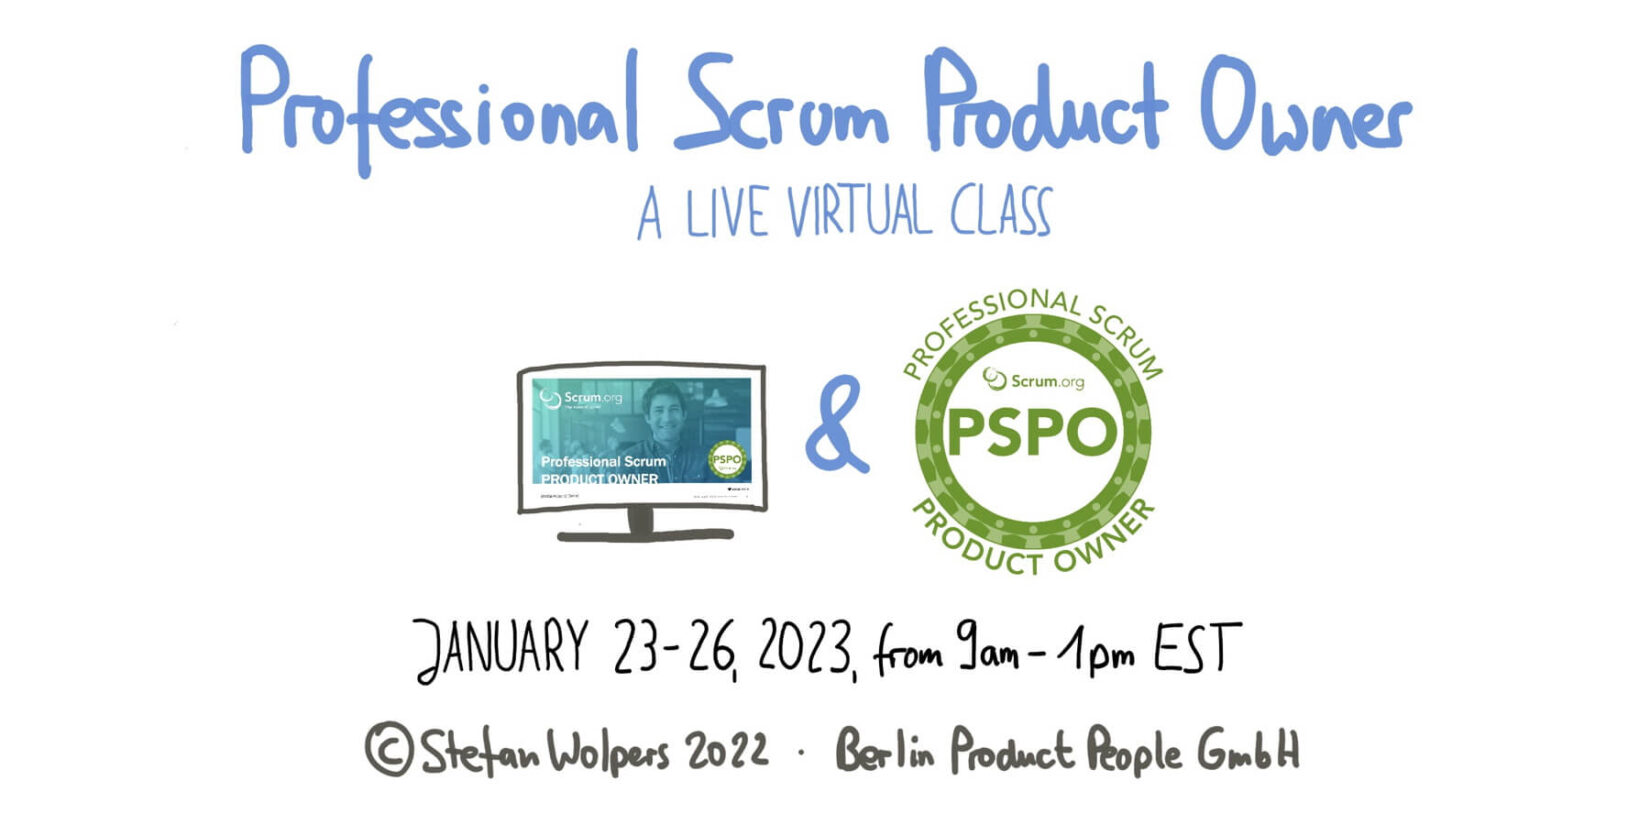 Professional Scrum Product Owner Training w/ PSPO I Certificate — January 23-26, 2023 — Berlin Product People GmbH